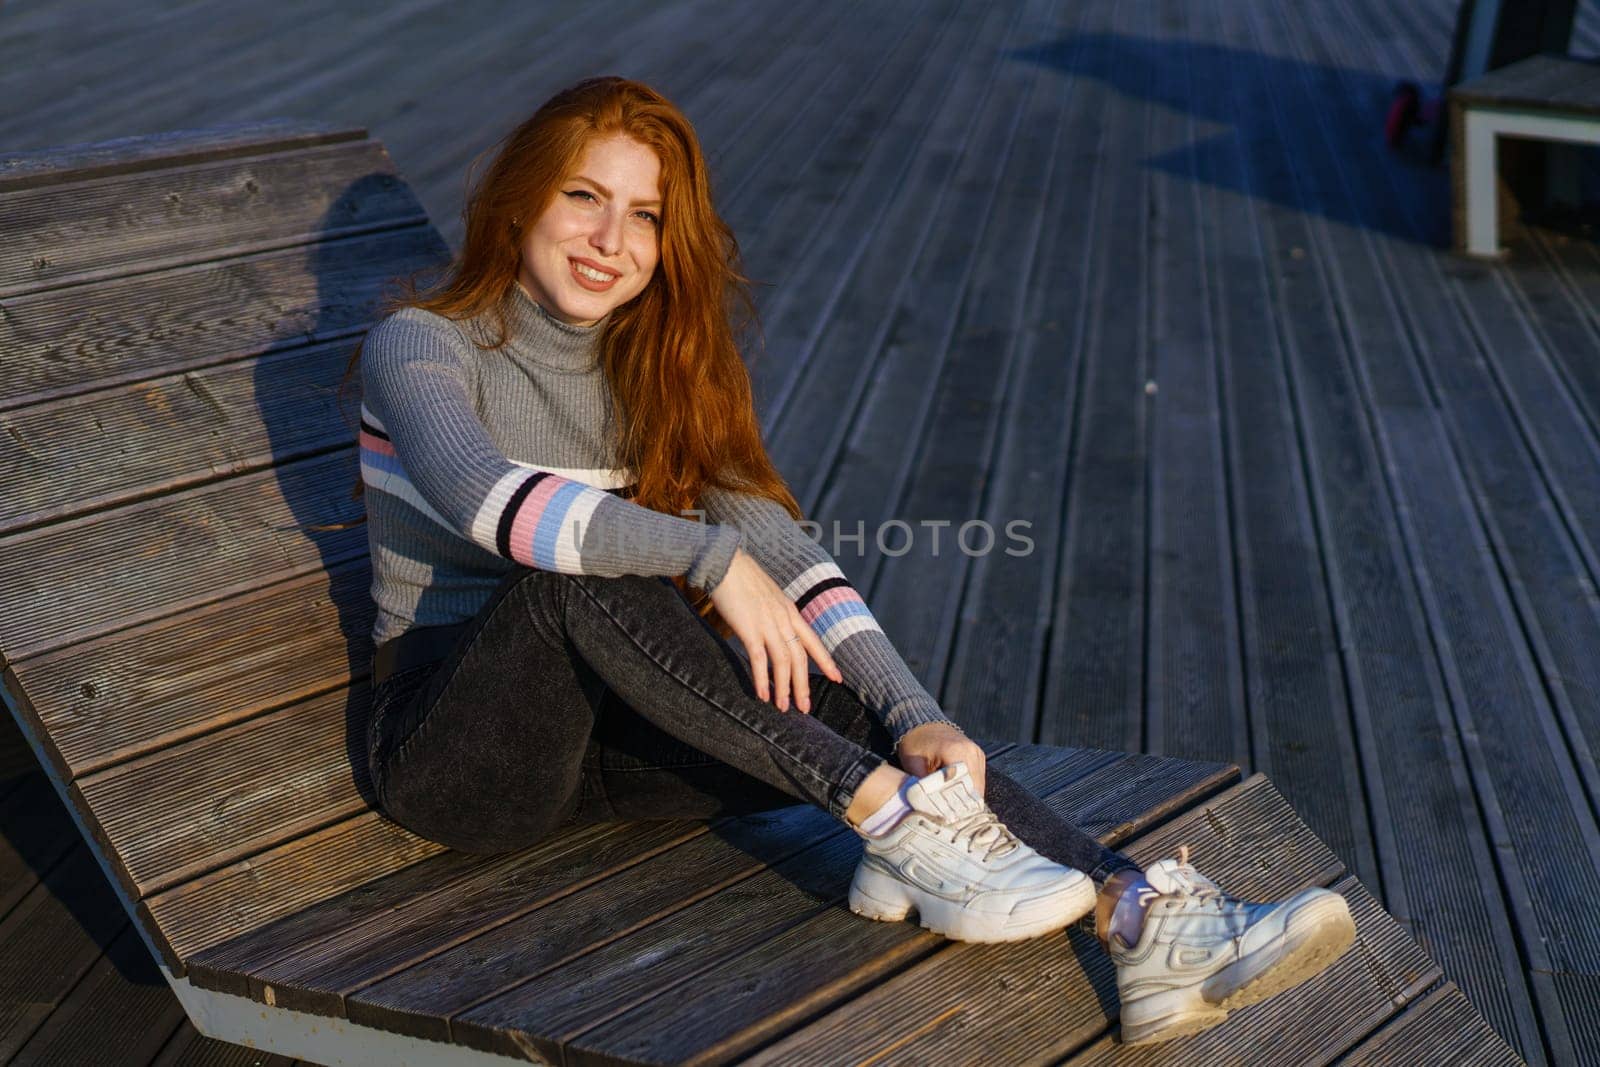 Happy young woman with long red hair of Caucasian nationality, is sitting in casual clothes in the park on a wooden deck on a sunny day and smiling